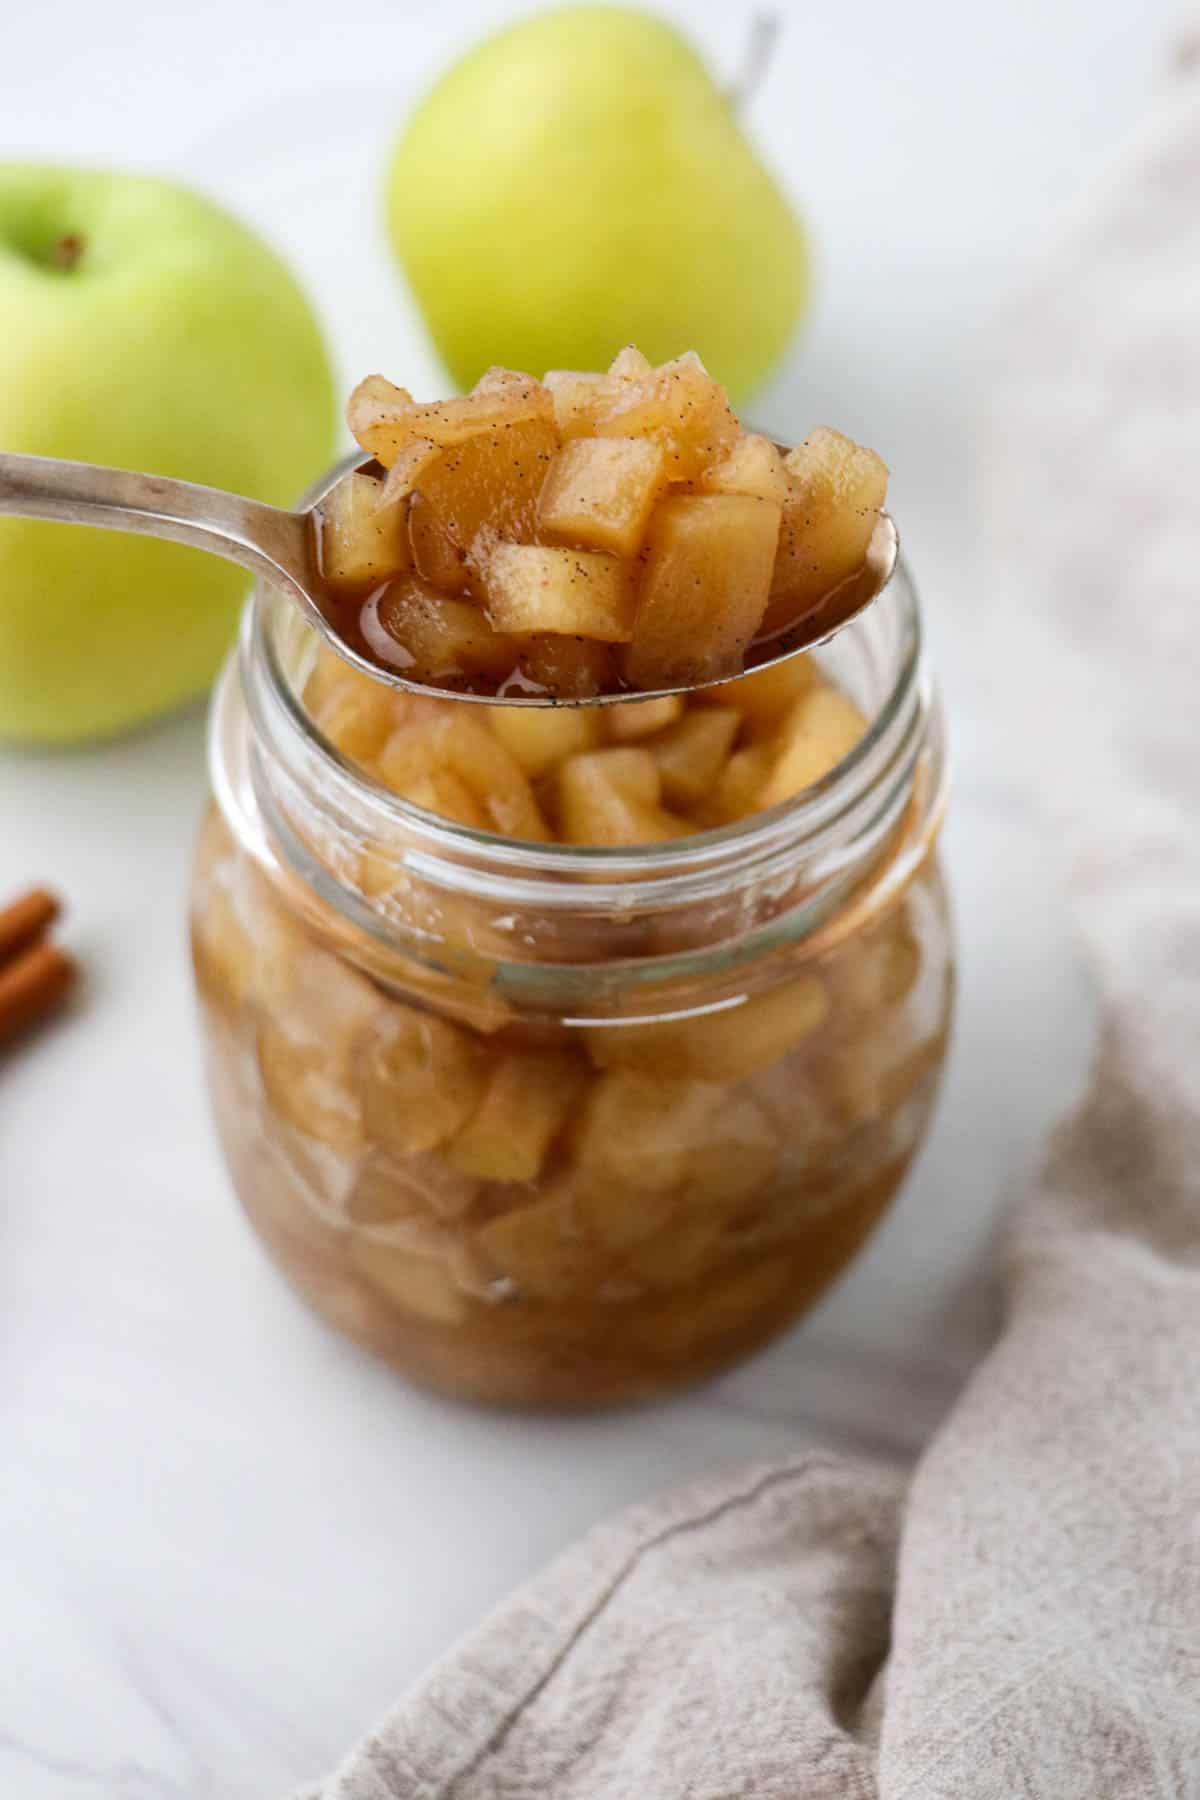 Spoonful of apple compote in front of a jar of compote and apples.